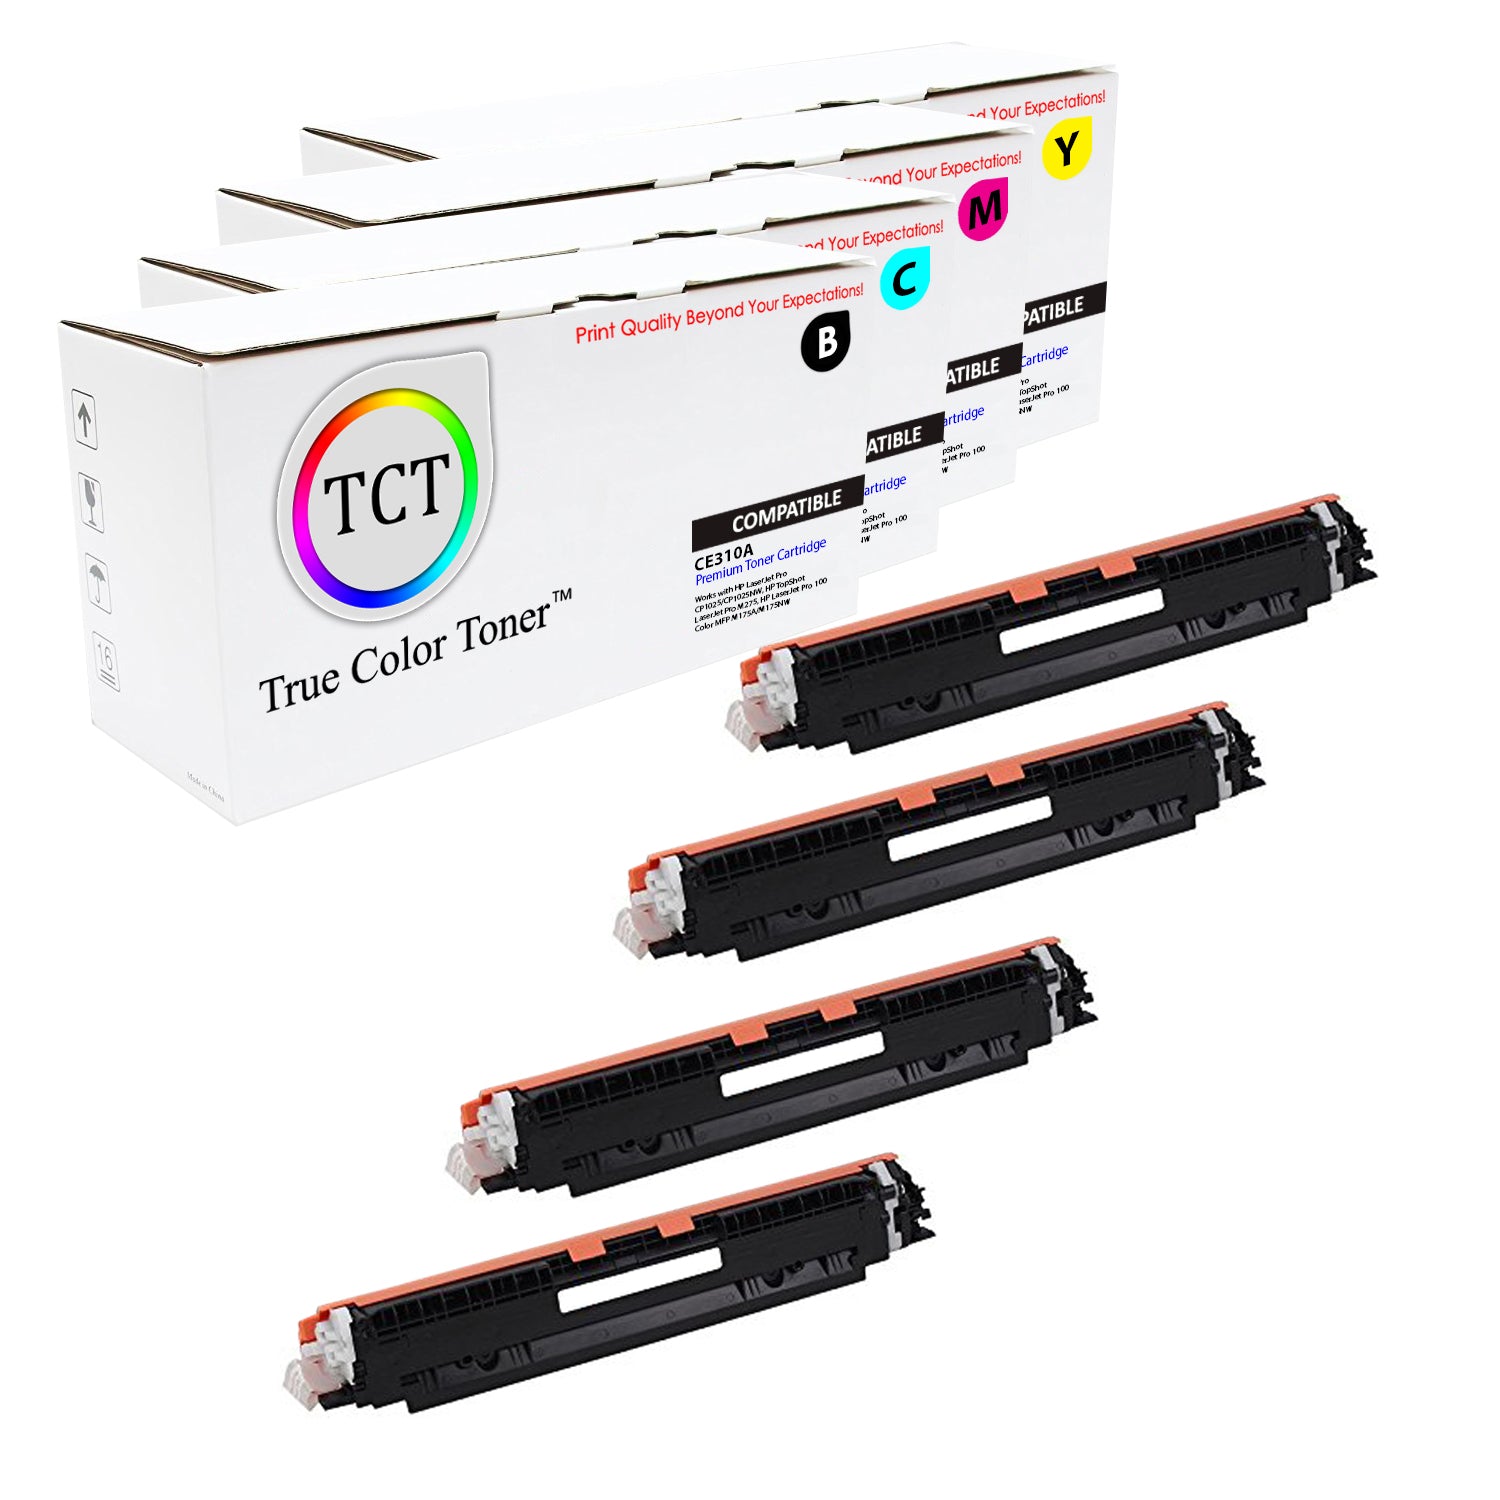 TCT Compatible Toner Cartridge Replacement for the HP 126A Series - 4 Pack (BK, C, M, Y)